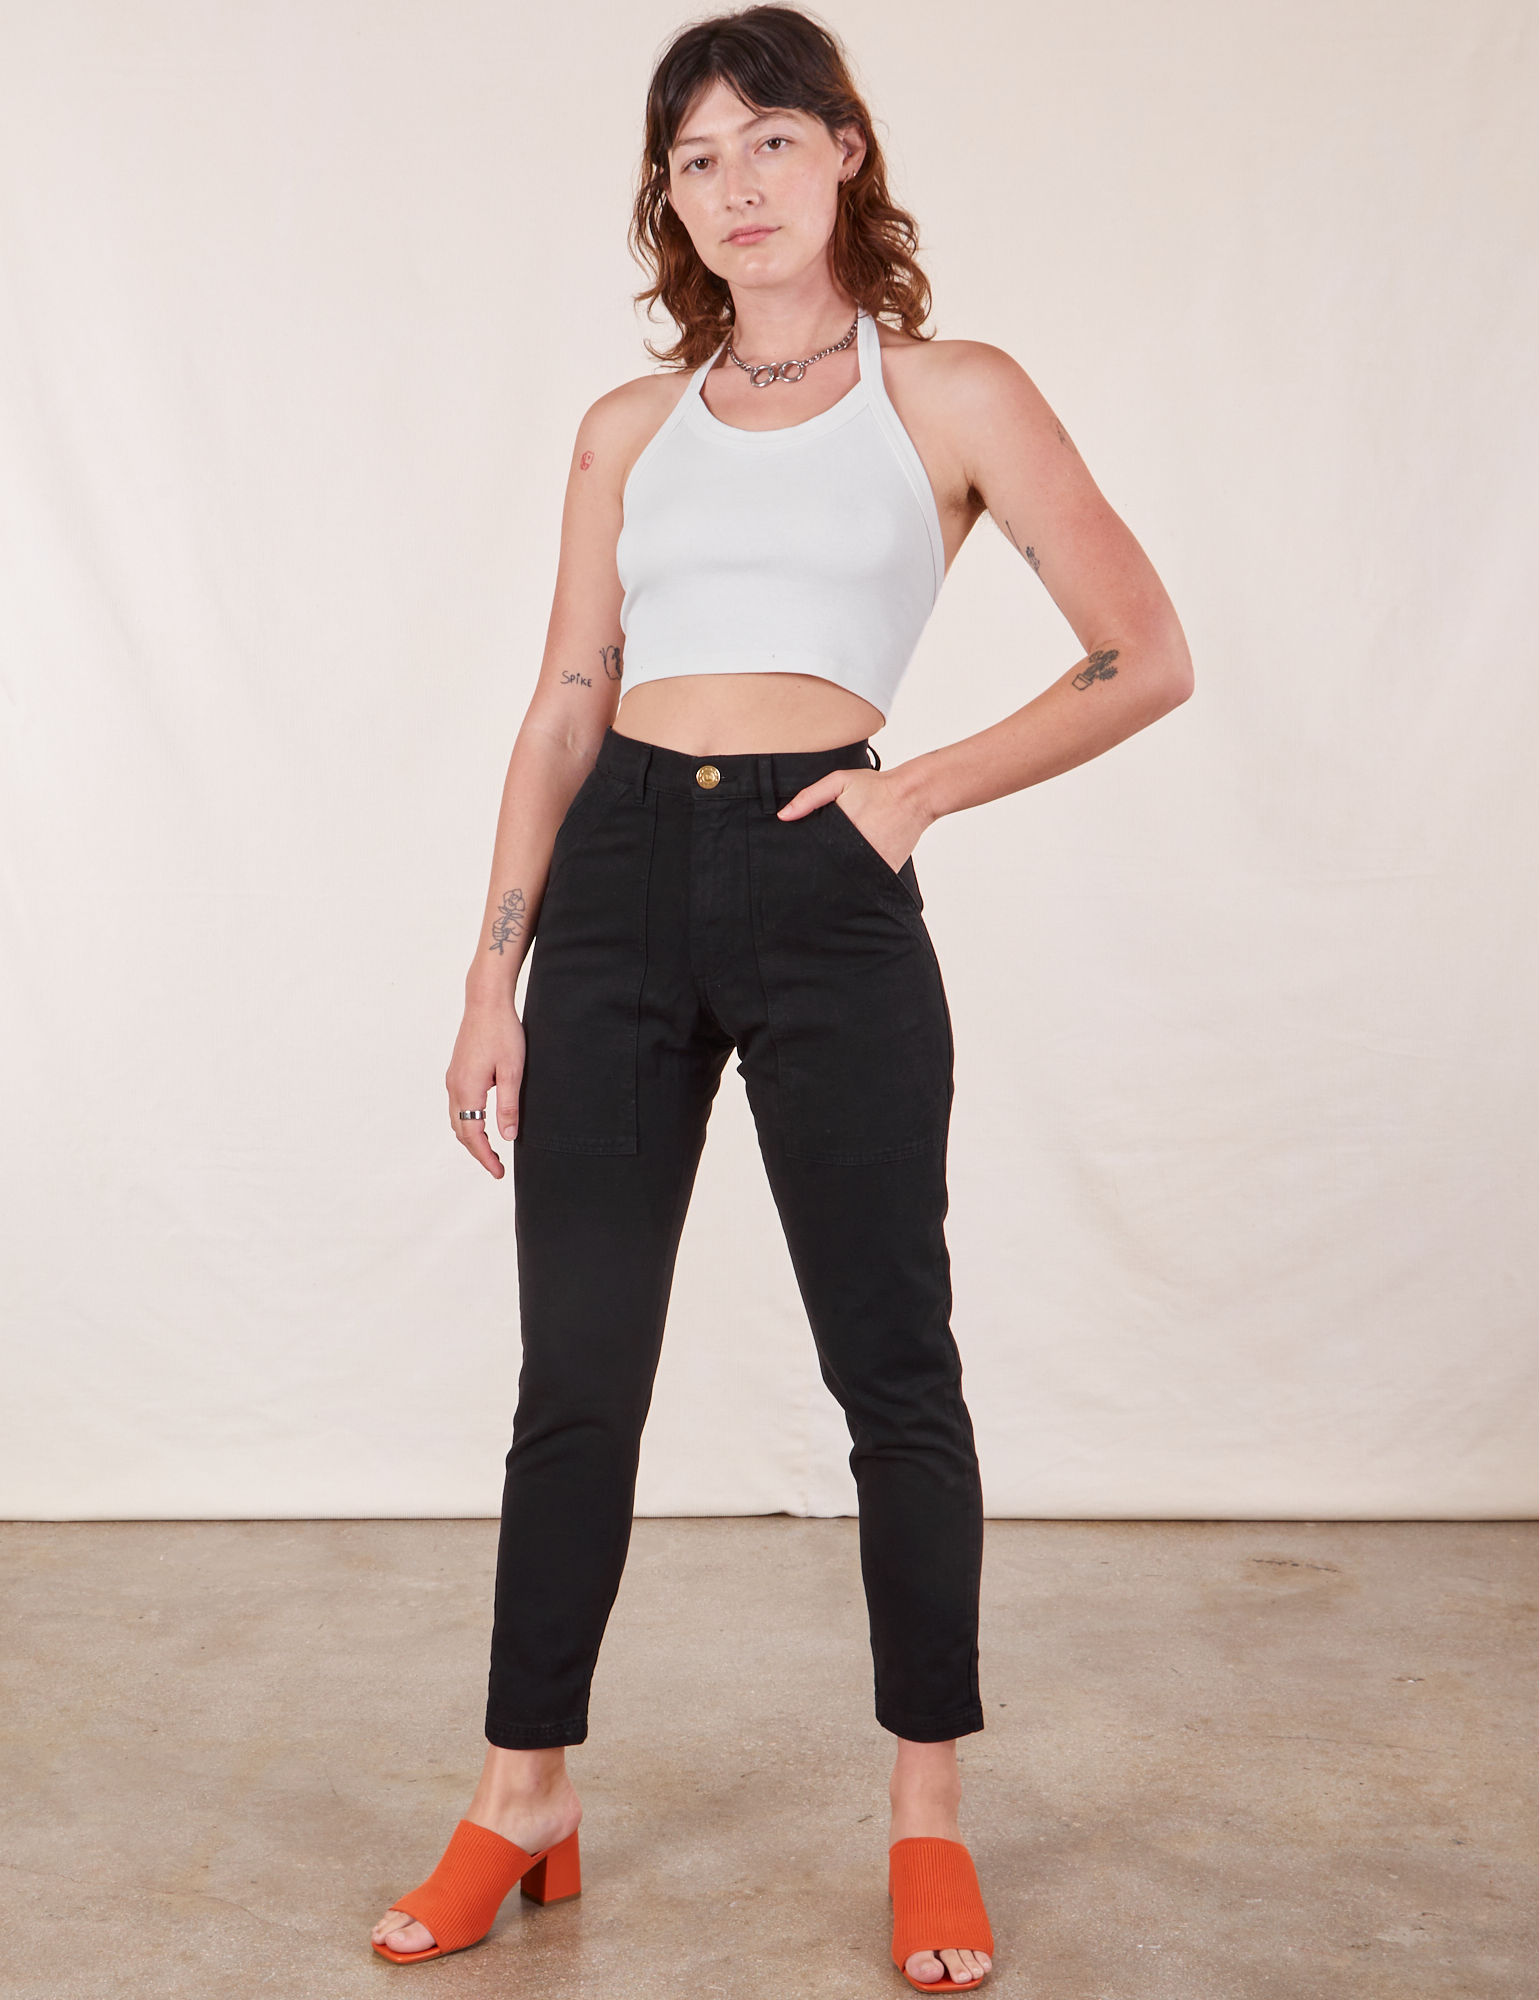 Alex is 5&#39;8&quot; and wearing XXS Pencil Pants in Basic Black paired with vintage off-white Halter Top